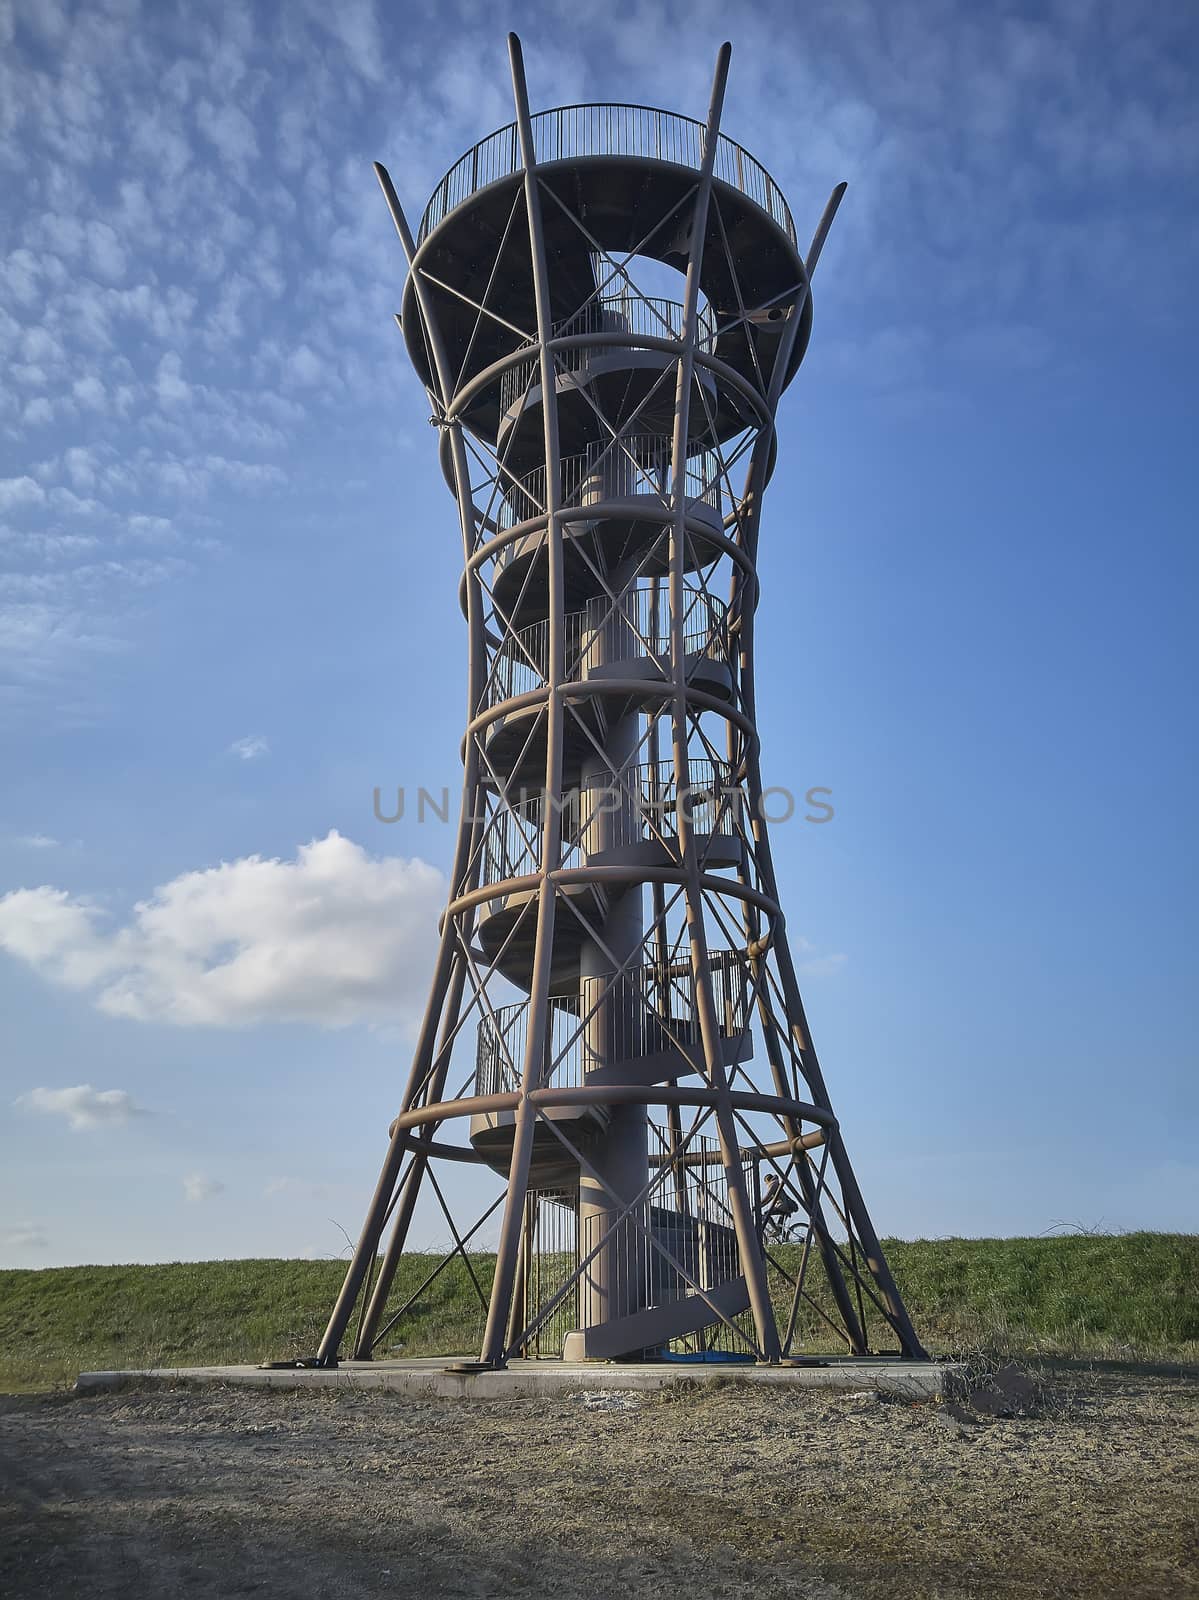 Panoramic tower in metal with spiral staircase surrounded by greenery and nature to observe the surrounding landscape from above.